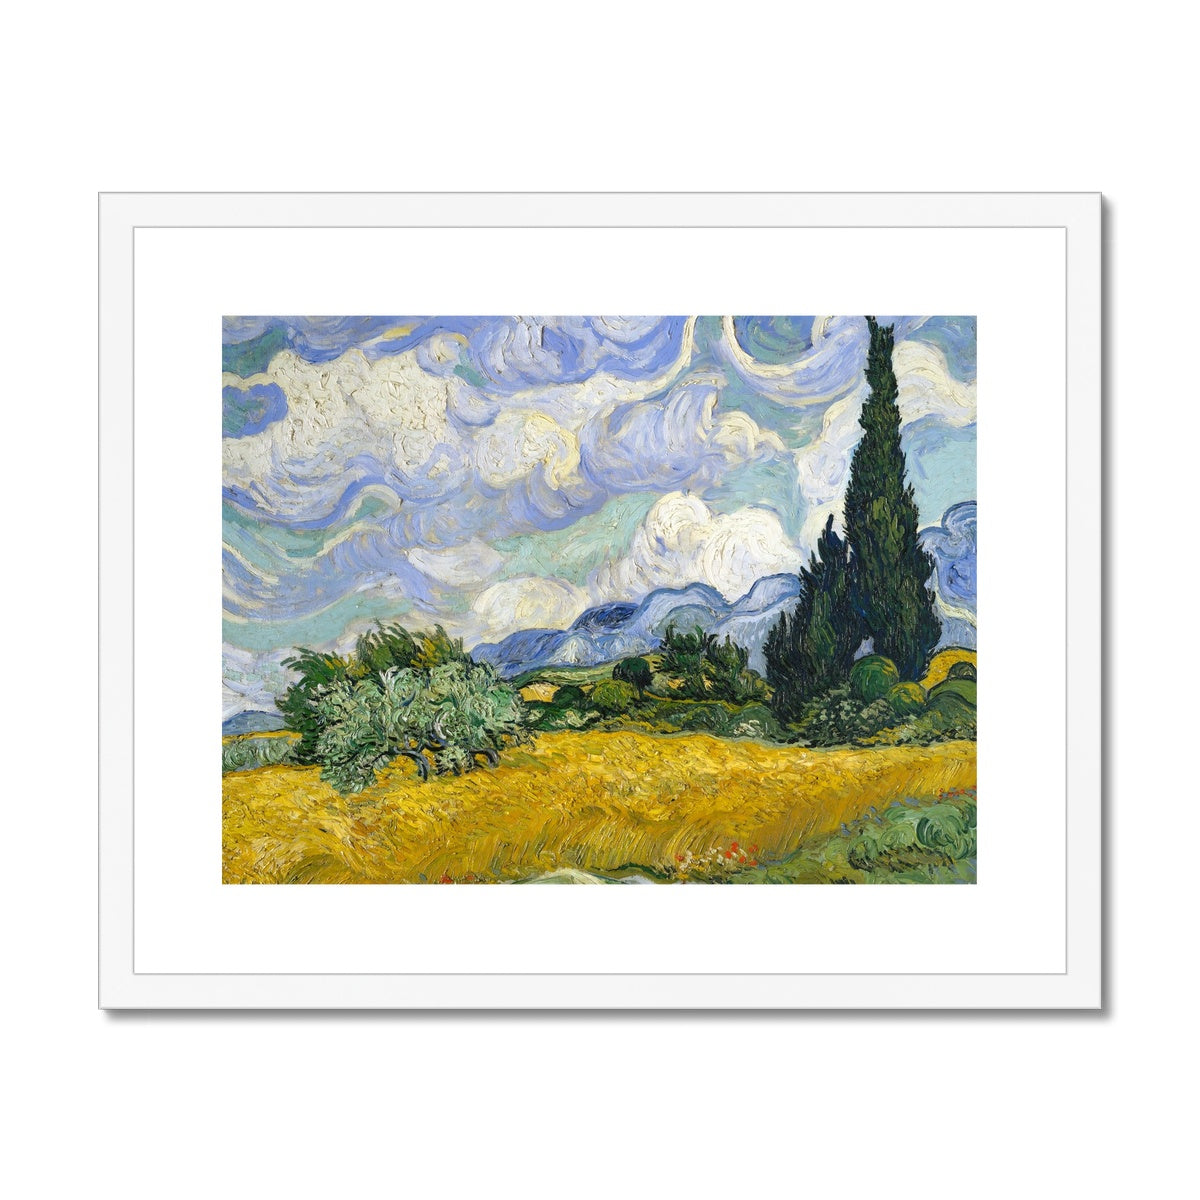 Vincent Van Gogh Framed Open Edition Art Print. 'Wheat Field with Cypresses'. Art Gallery Historic Art